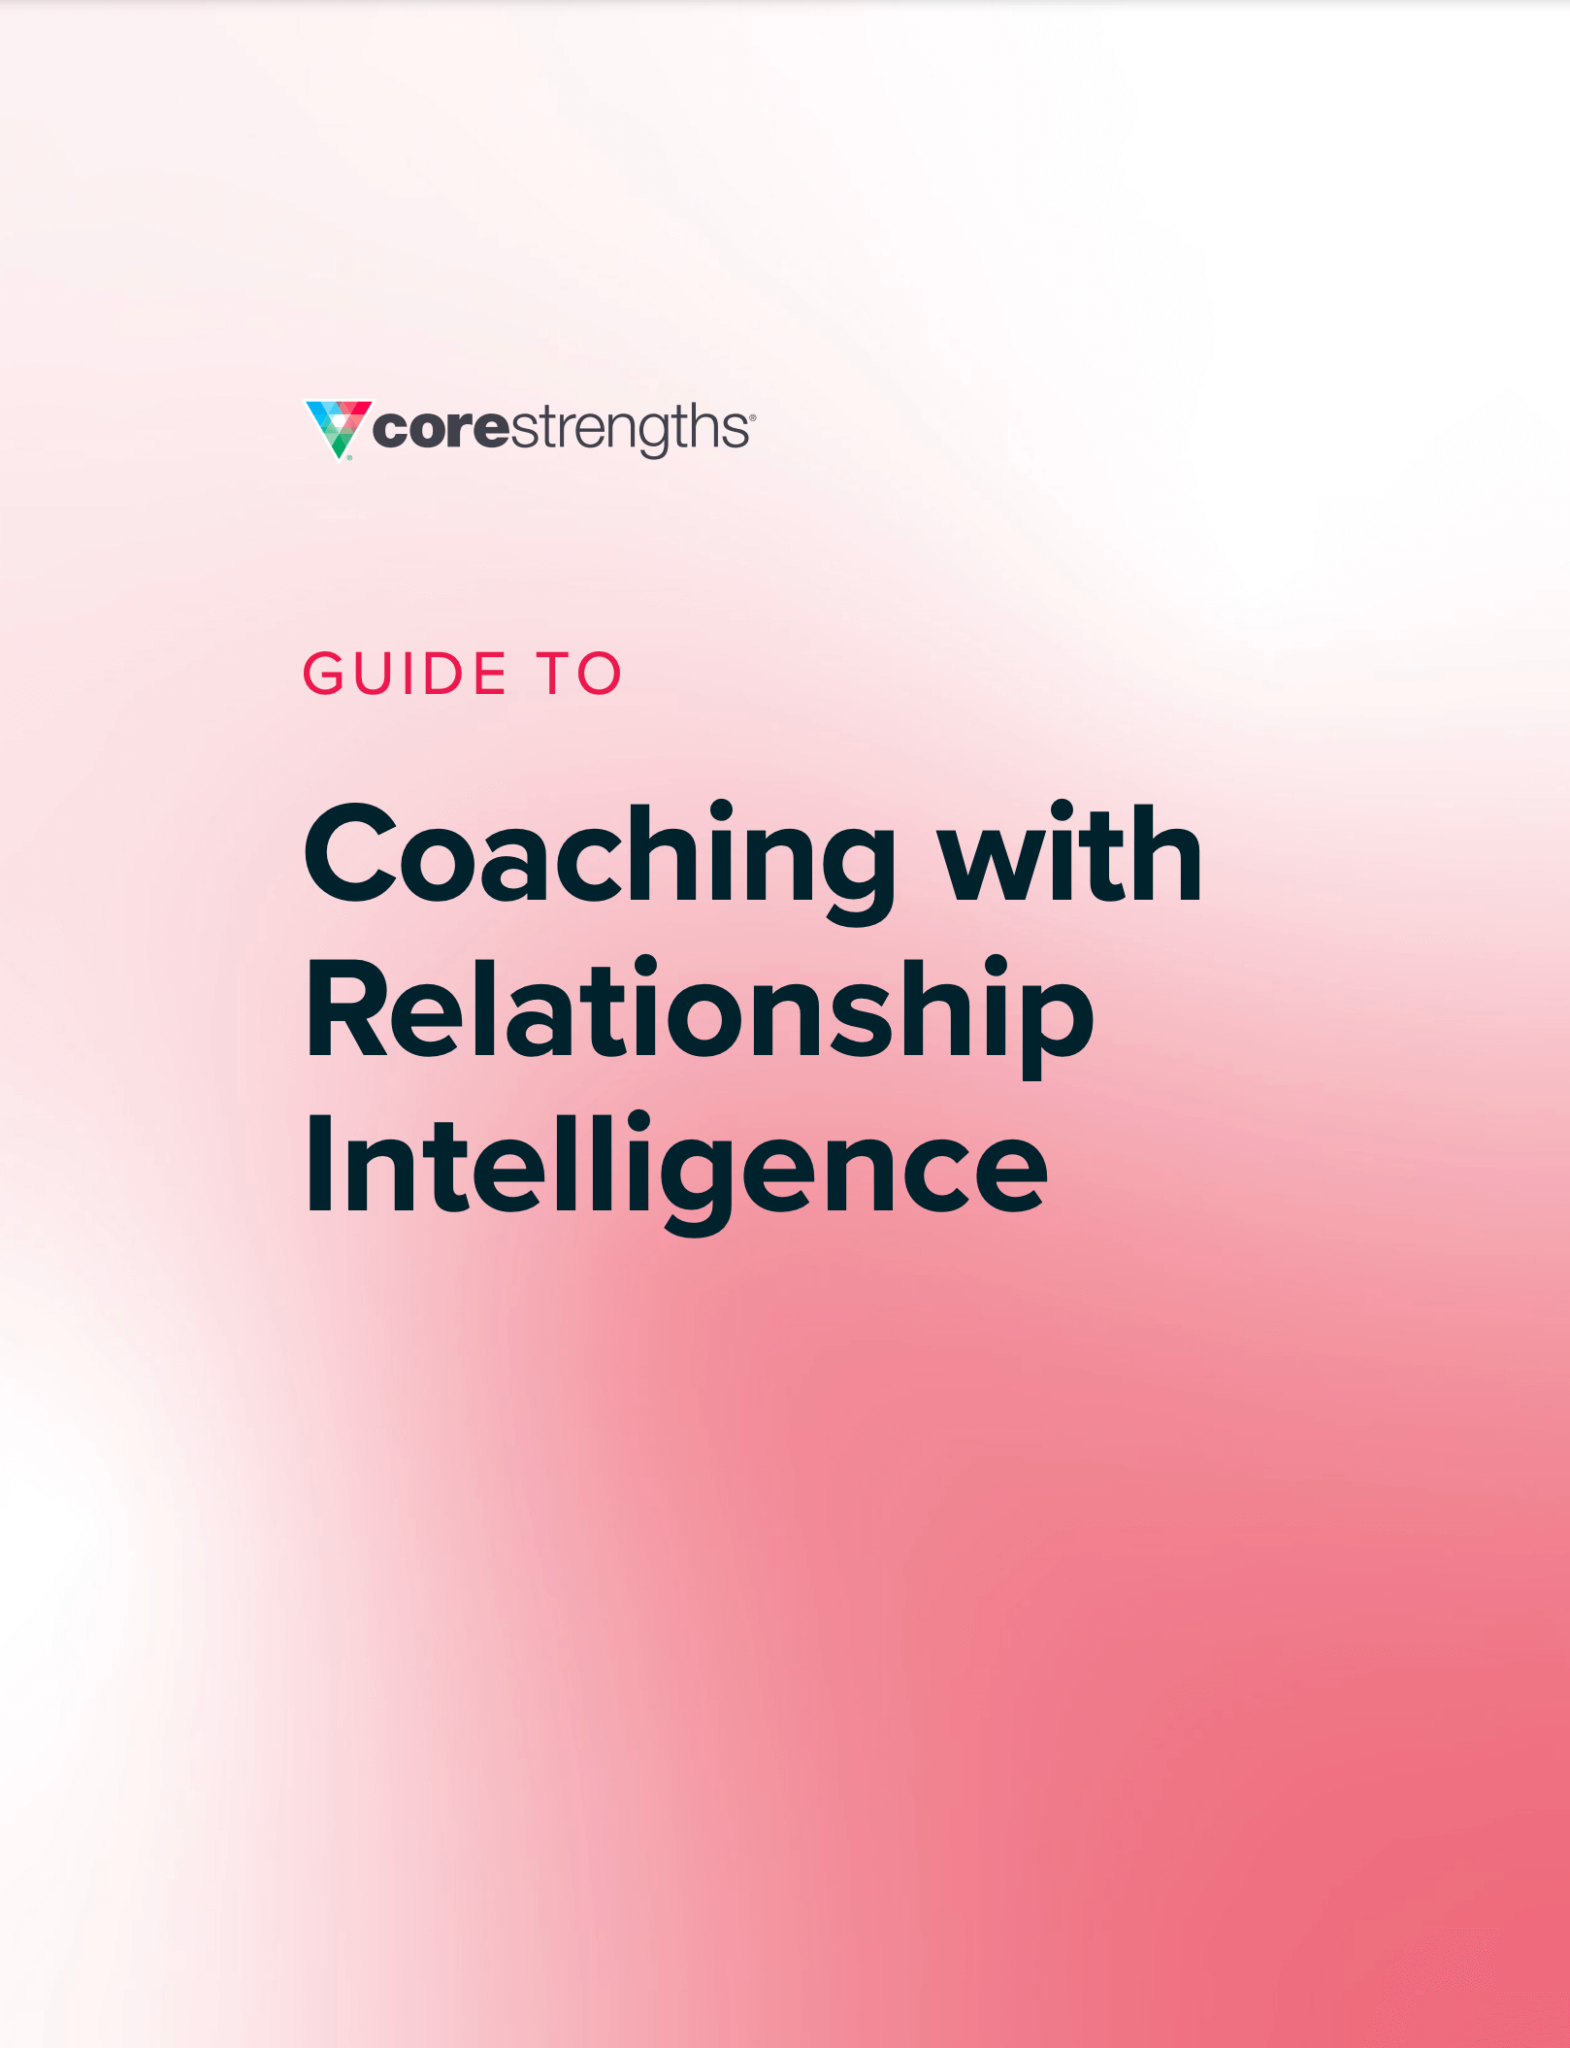 Guide to Coaching with Relationship Intelligence